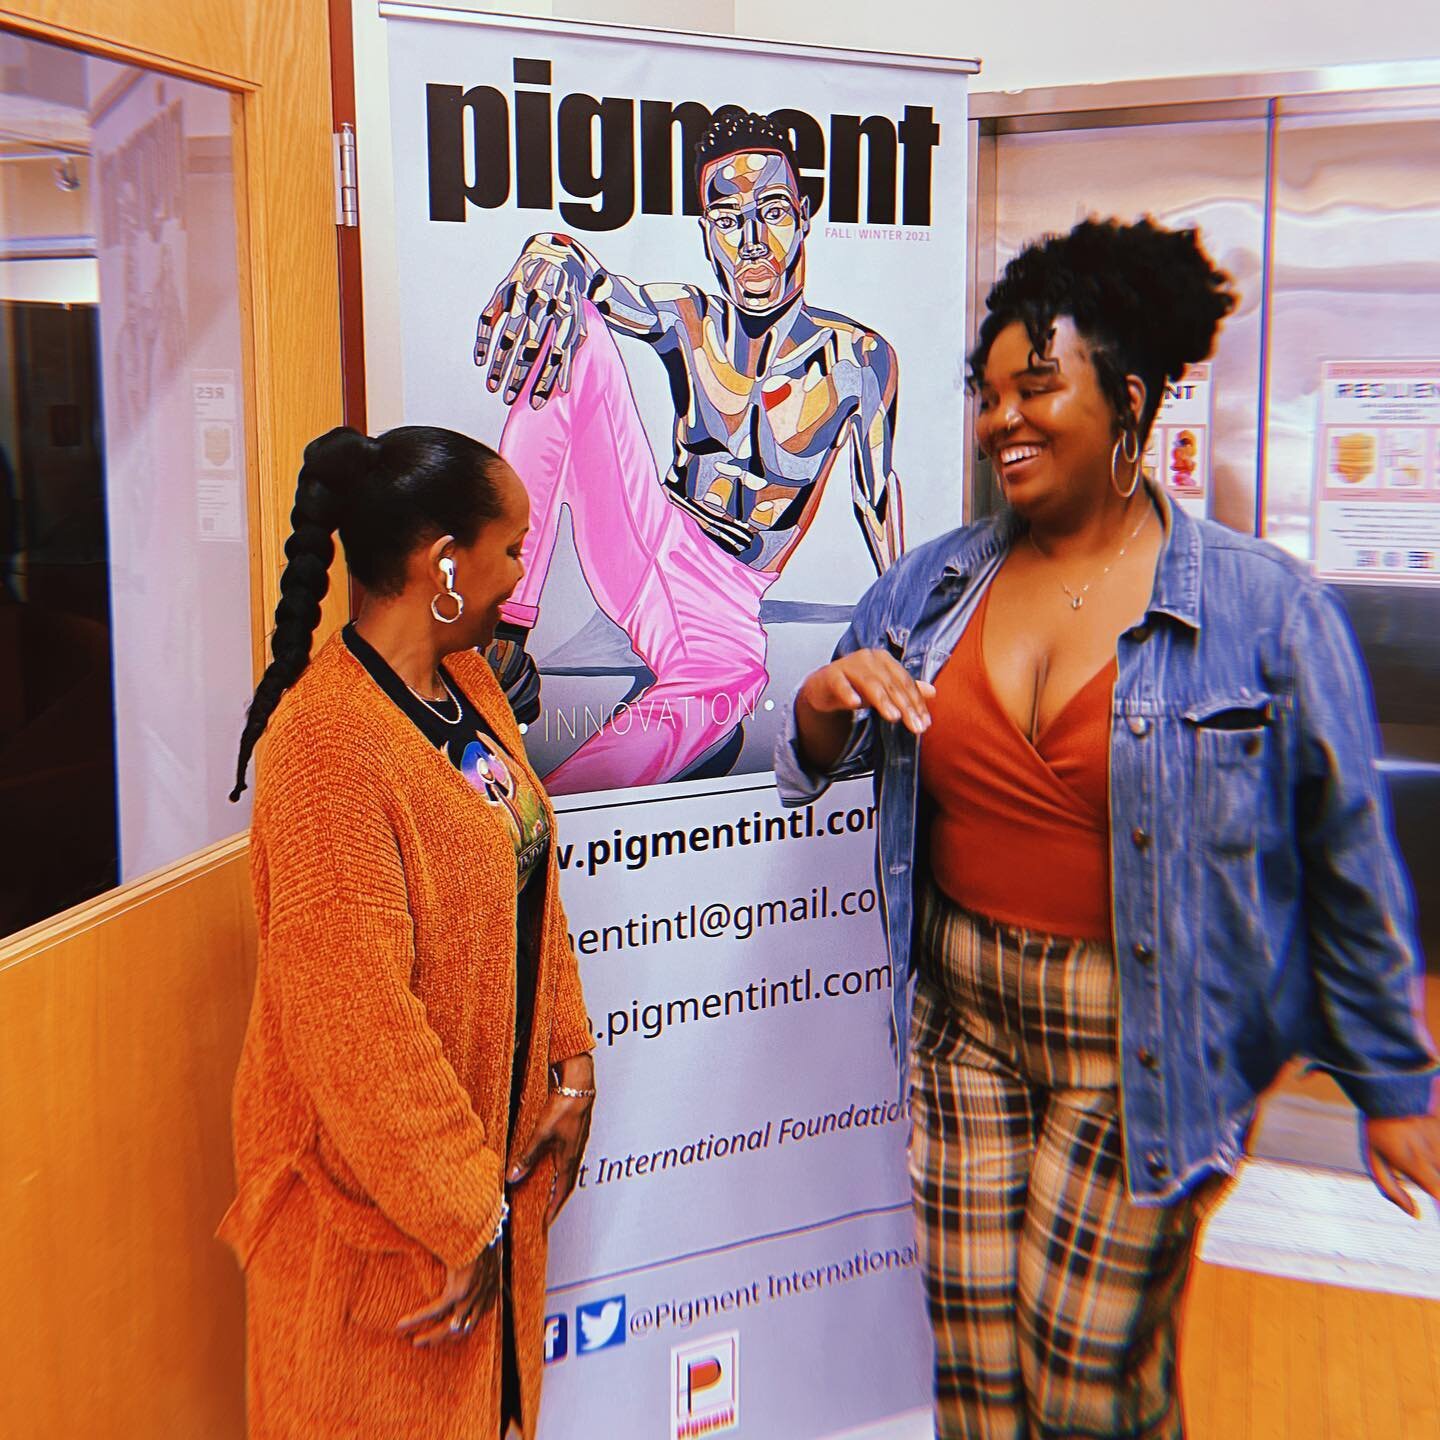 Me and my lil momma @jocelynnn.w had so much fun this weekend at the #blackfineartmonth kick off! Great food, art and conversation all around. Thank you for having us @pigmentintl! 

Follow the link in their bio to help them continue supporting our a